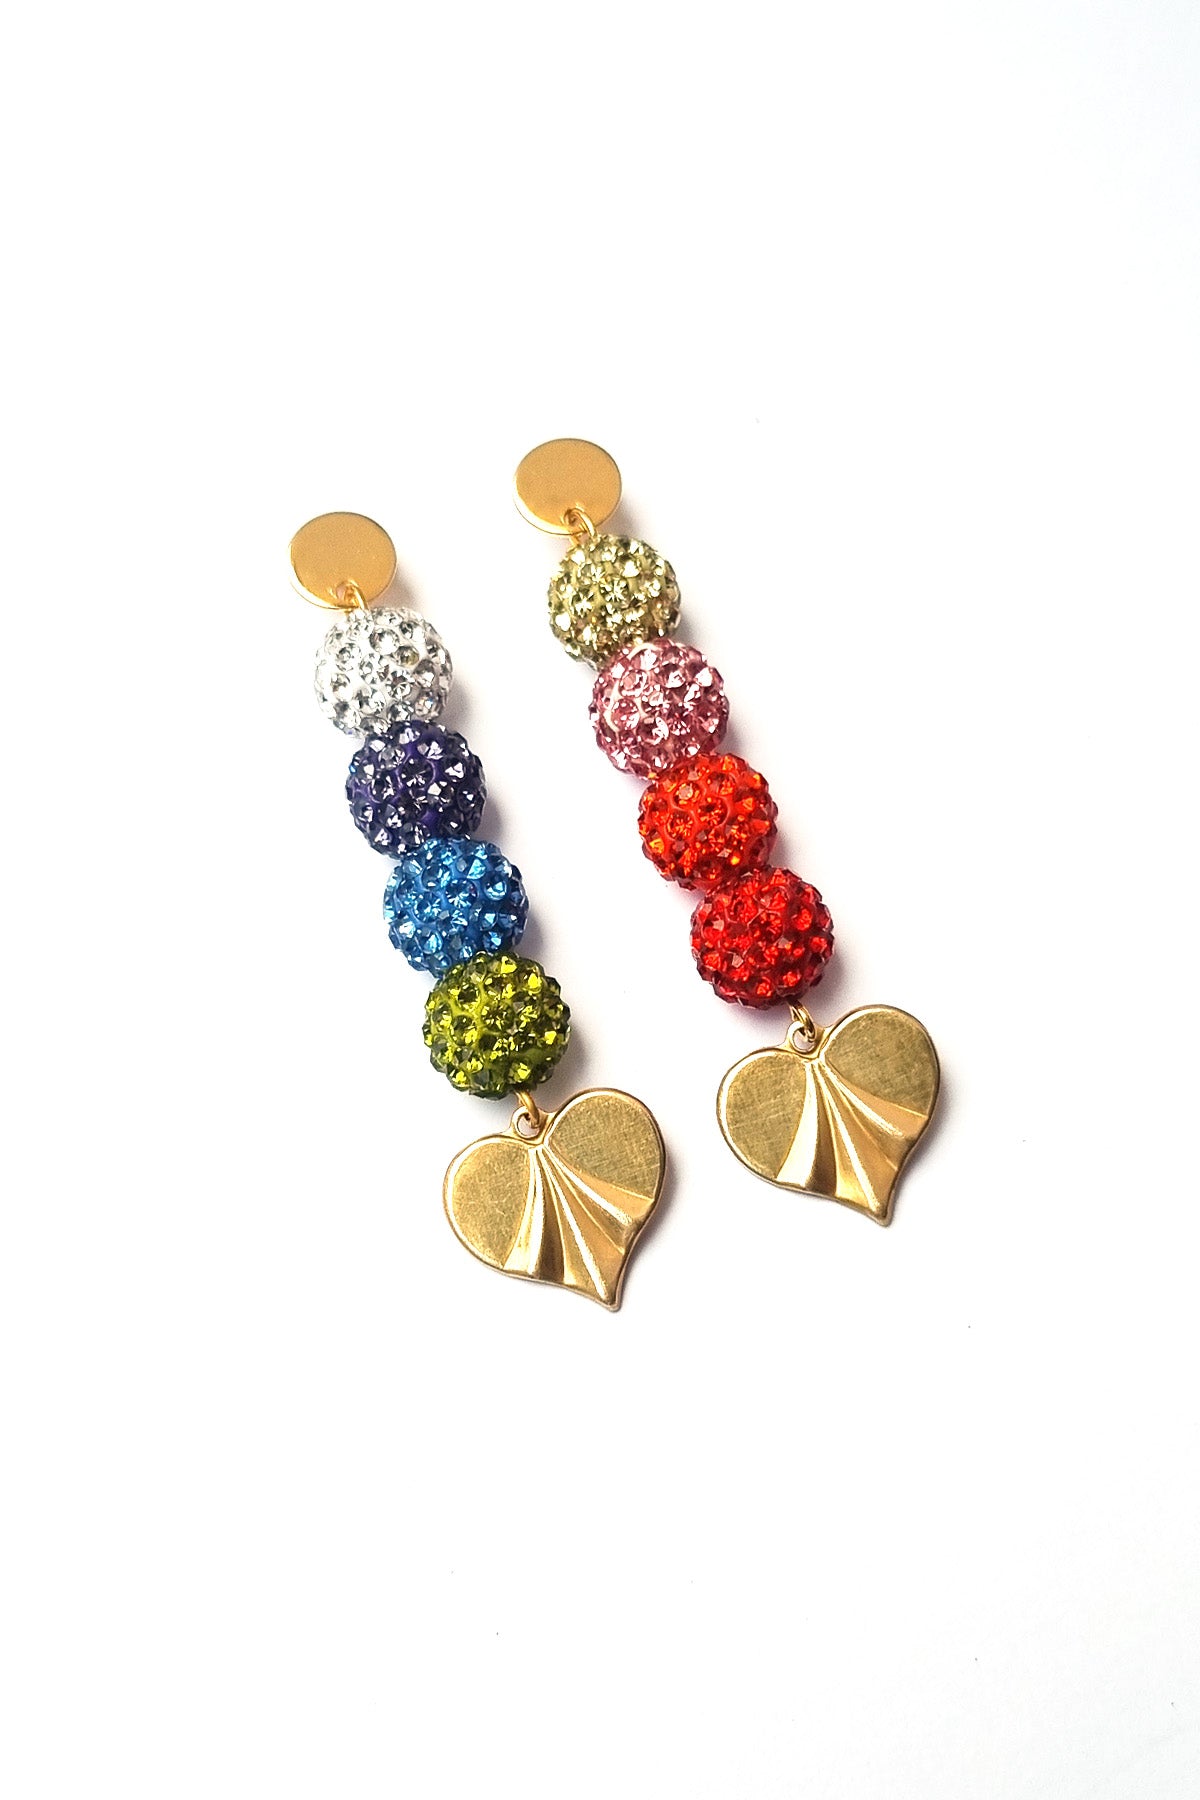 A pair of statement stud dangle earrings sit against a white background. They feature a gold stud top. One earring has a row of sparkly balls in white, purple, light blue and green, followed by a brass heart piece. The other earring has a light green, light pink, light red, and deep red sparkly ball, followed by a brass heart. 